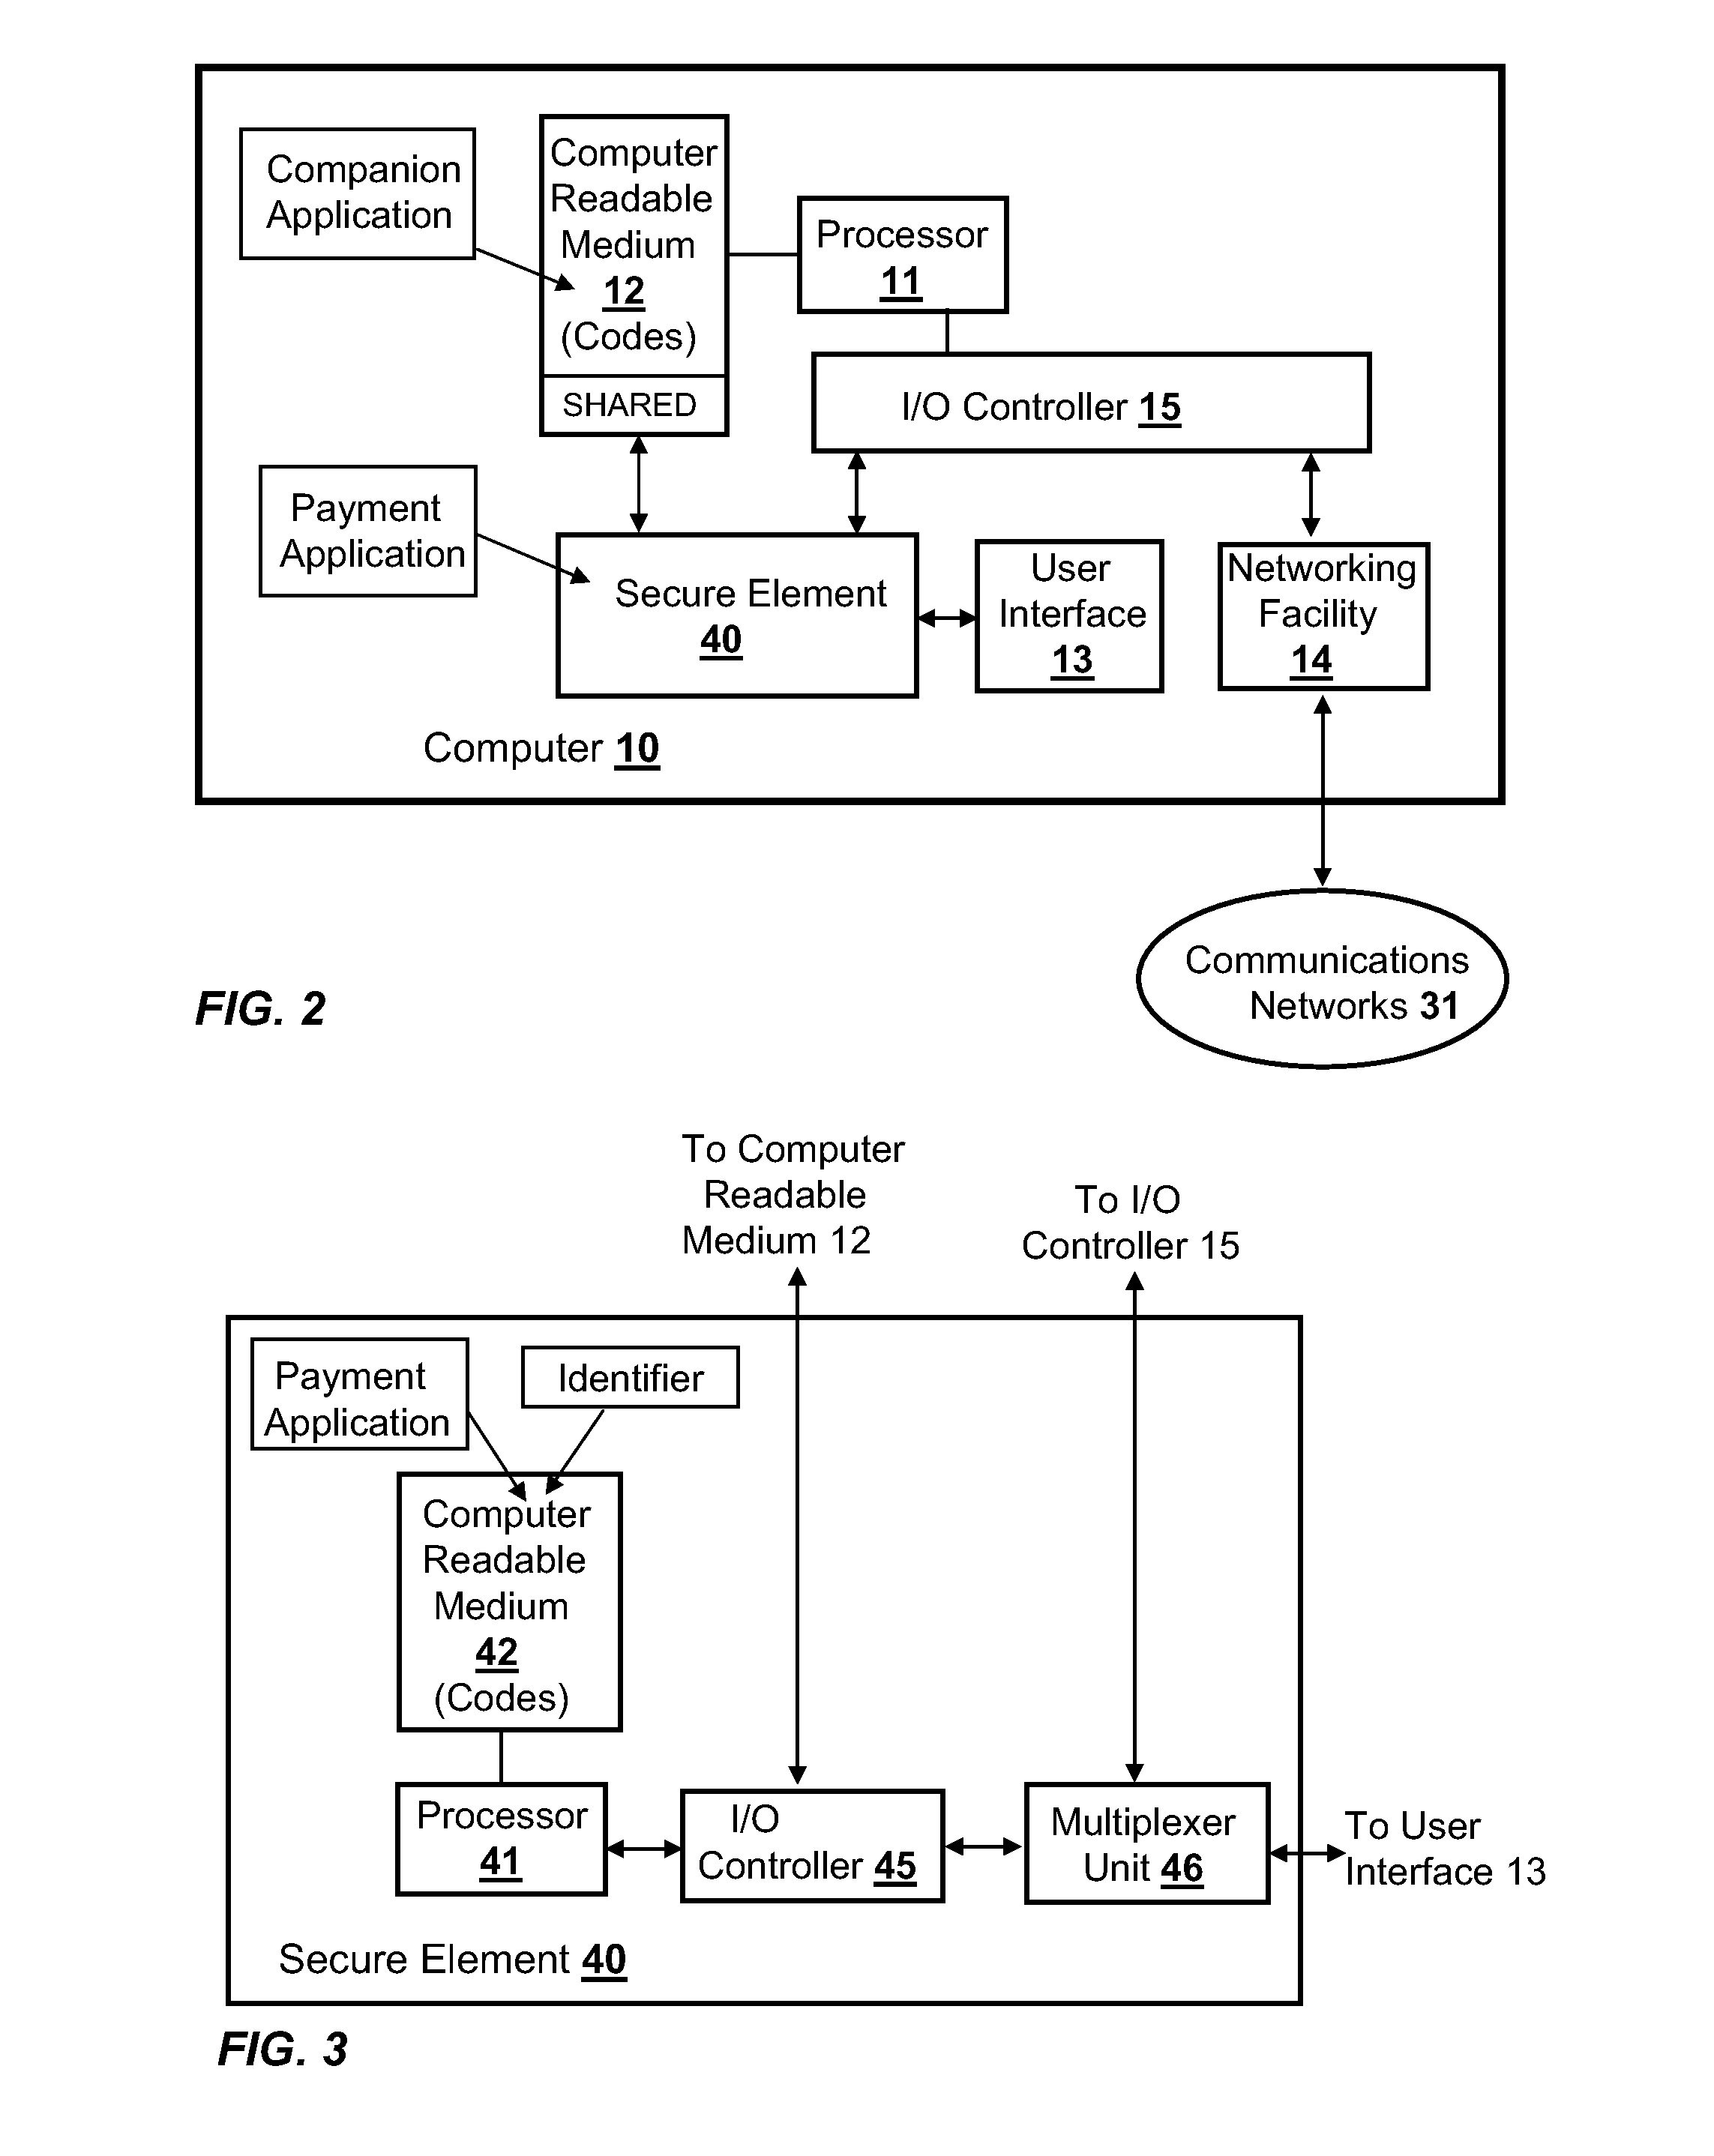 Integration of Payment Capability into Secure Elements of Computers